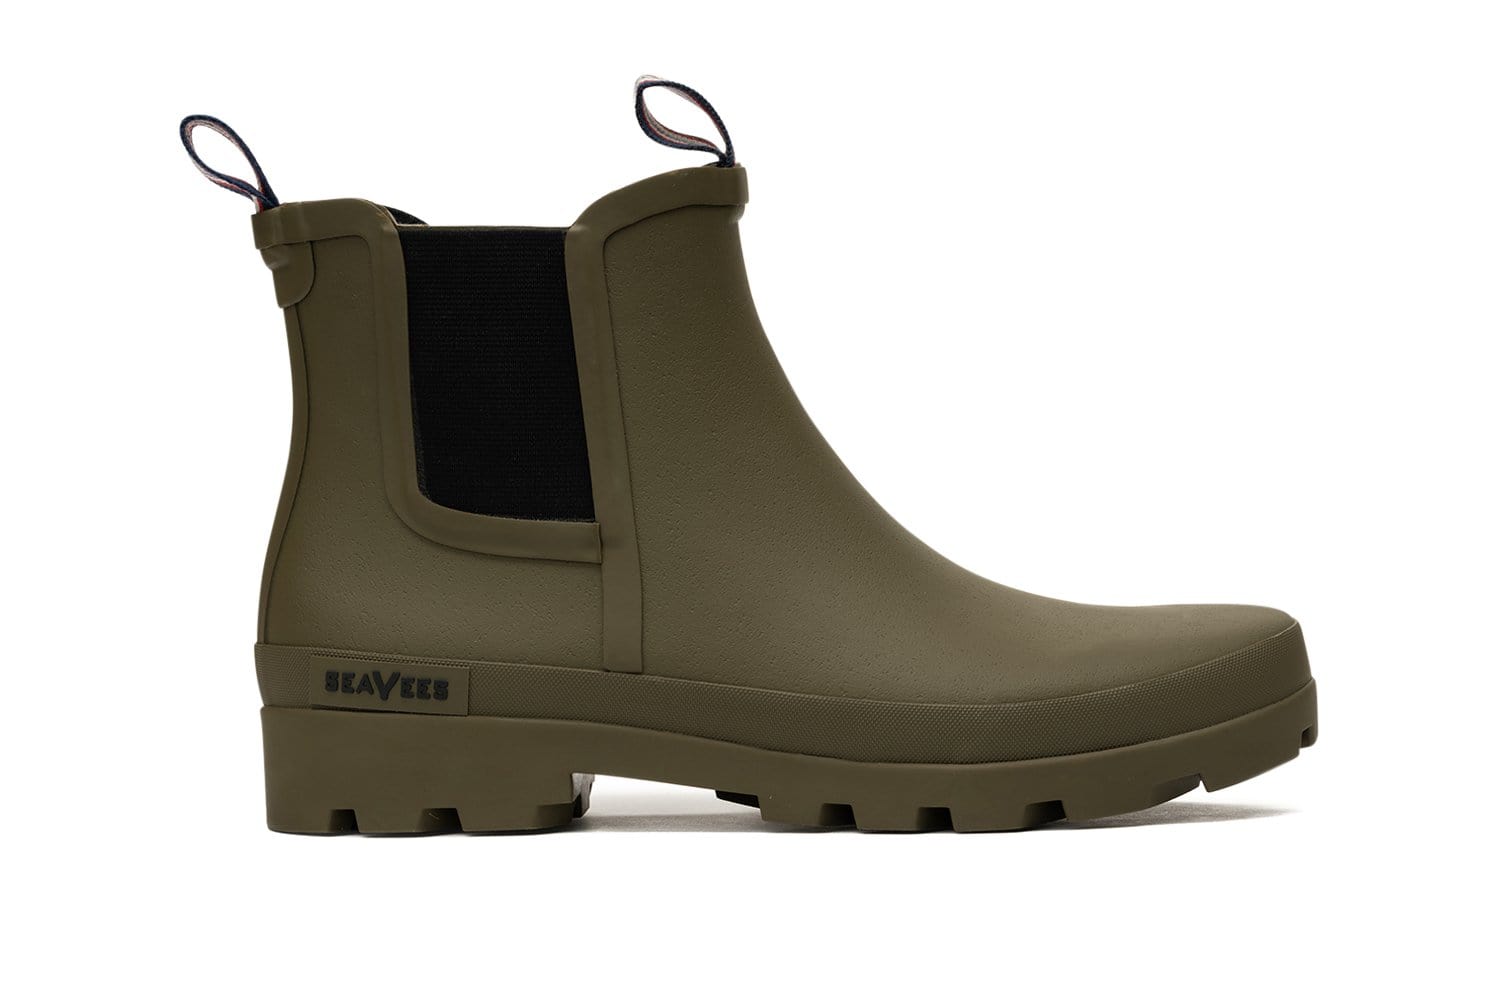 Side view of Bolinas Off Shore Boot in Military Olive, with side elastic panels.